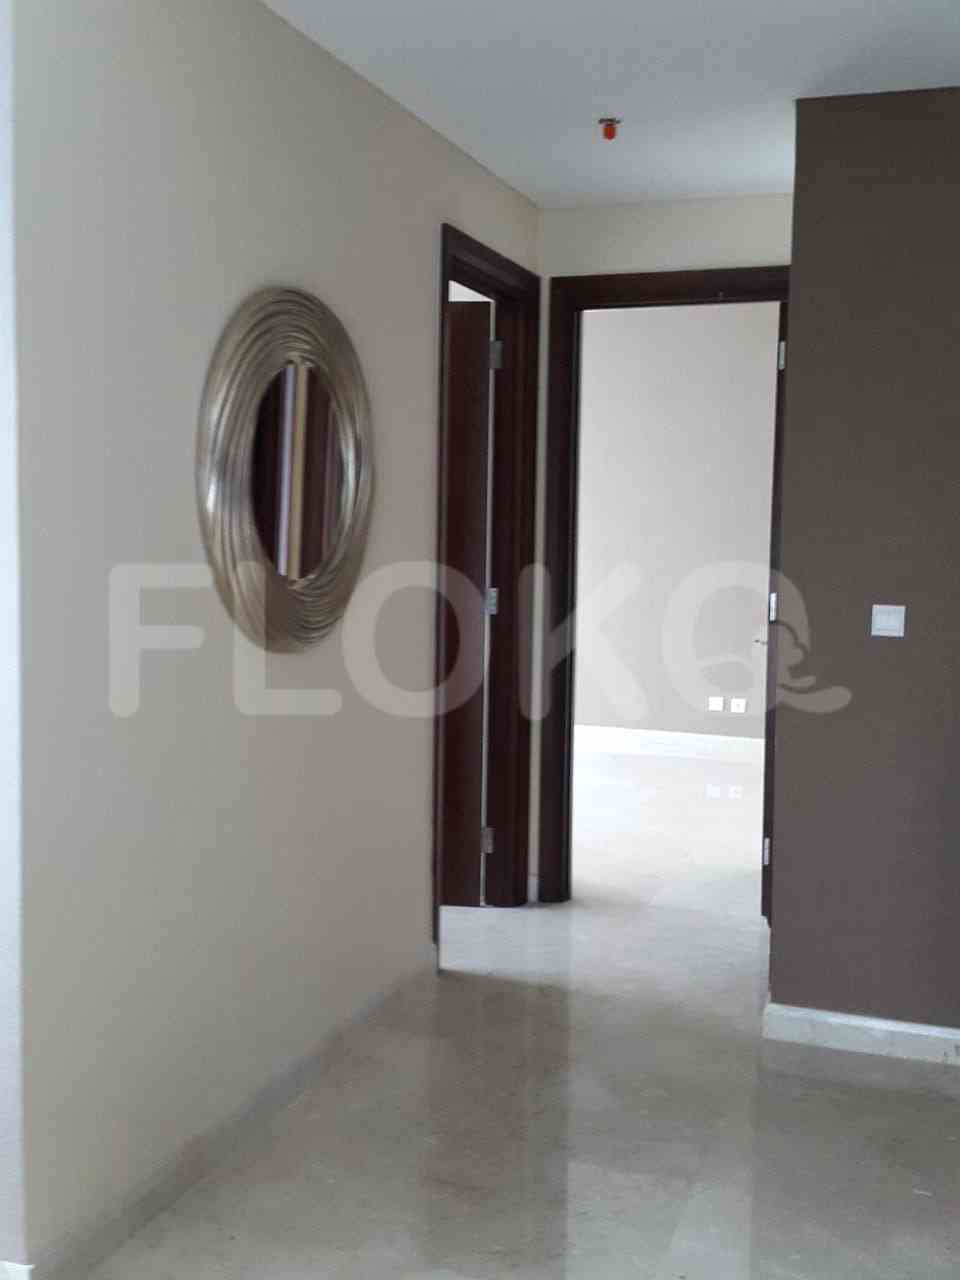 2 Bedroom on 16th Floor for Rent in Essence Darmawangsa Apartment - fcife4 5